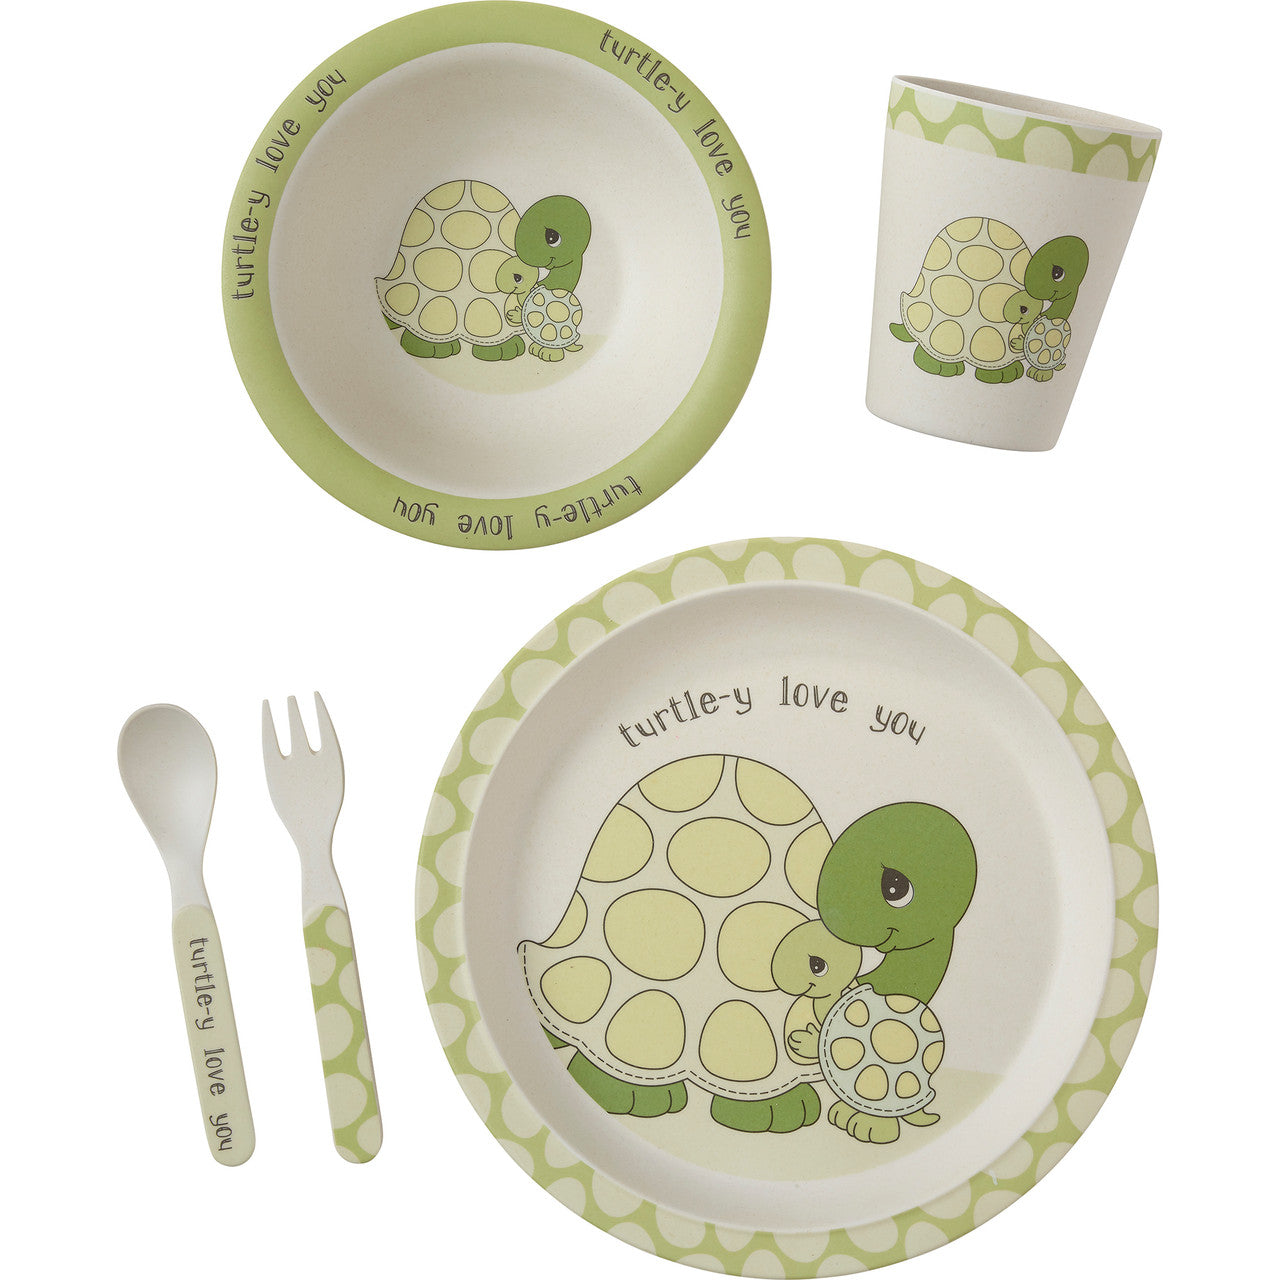 Mealtime Gift Set - 5-Piece Bamboo